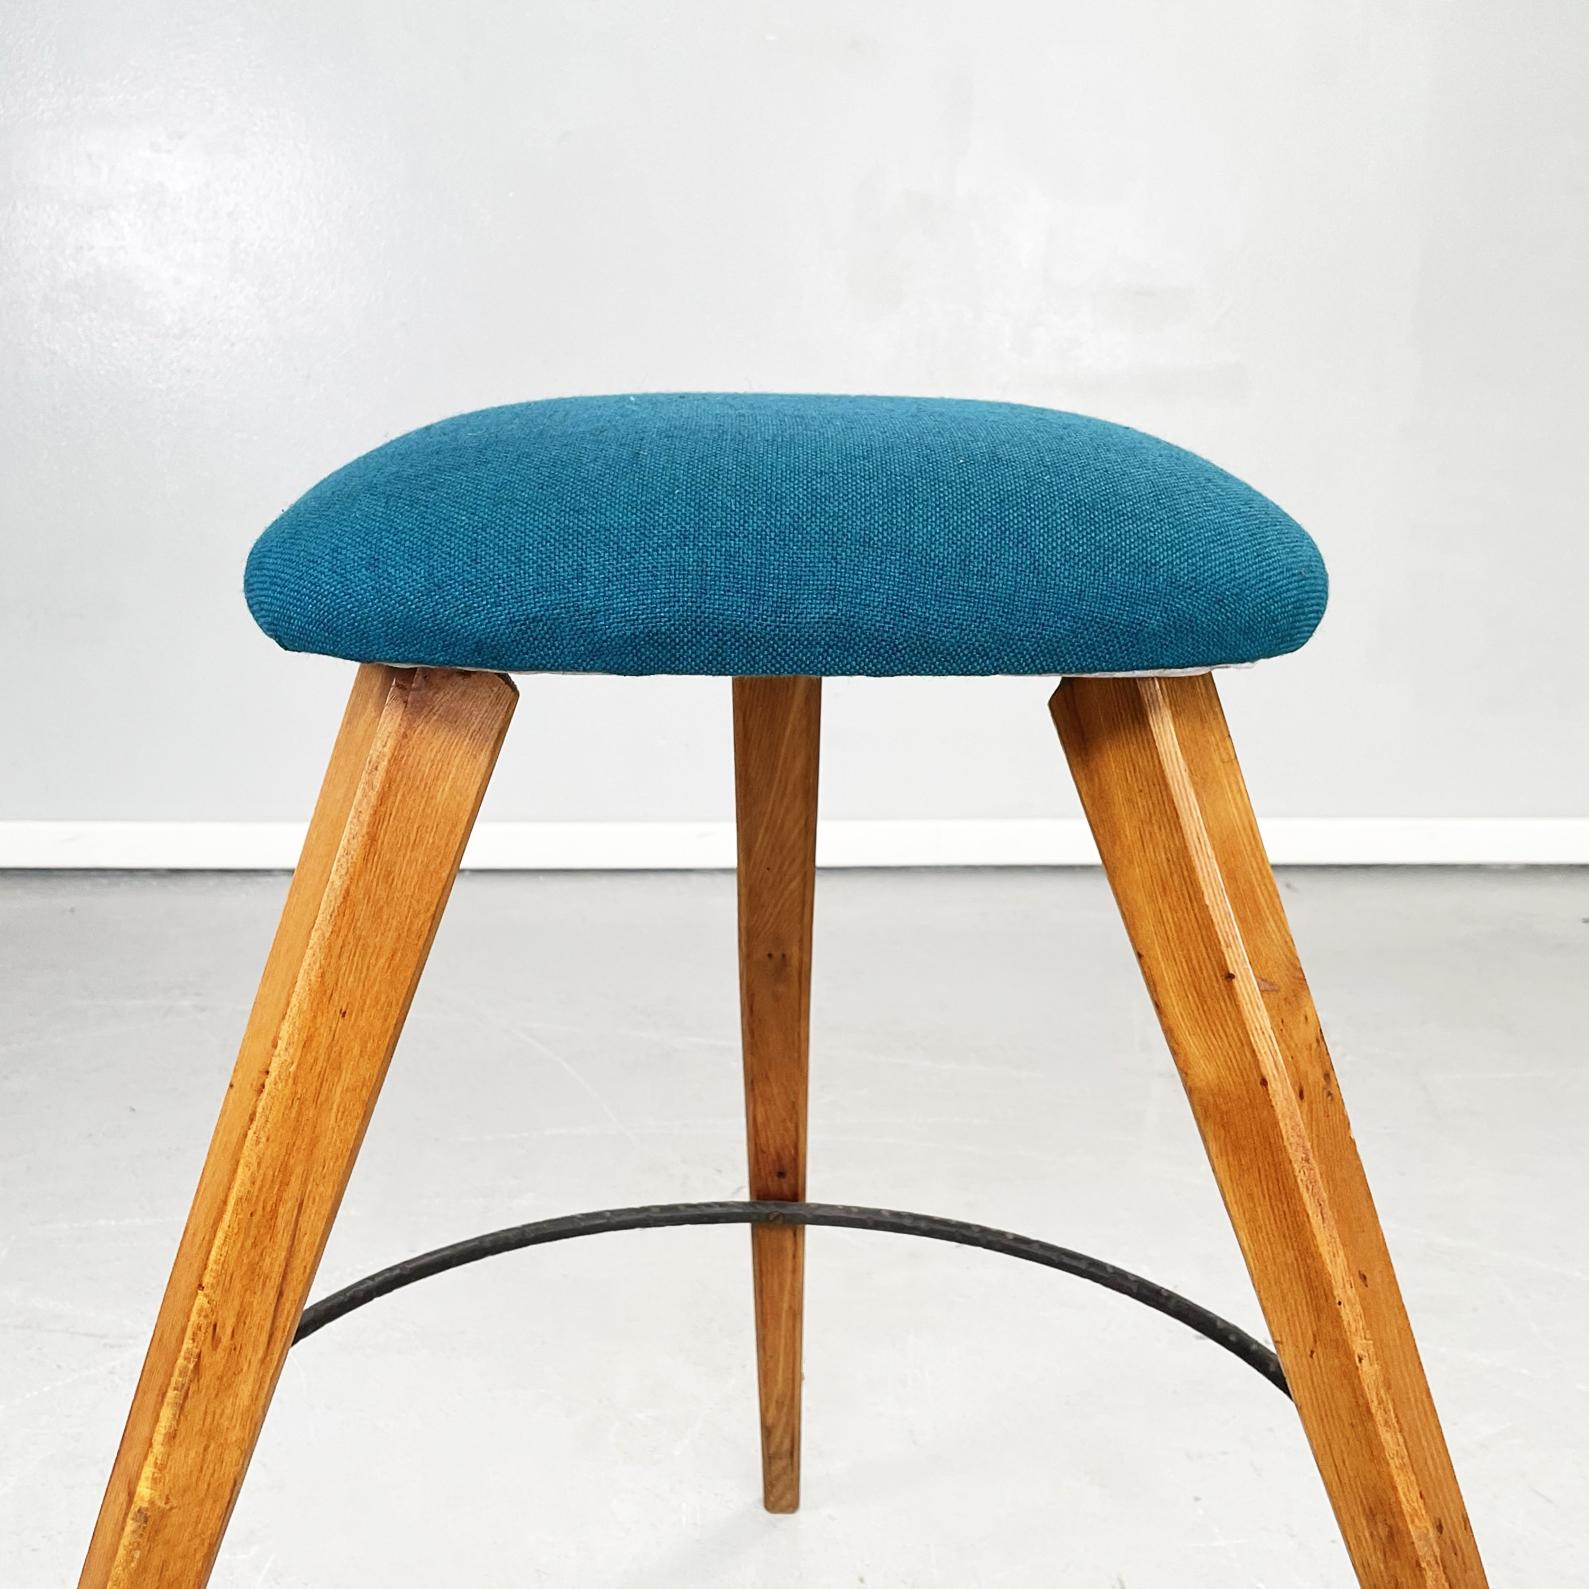 Italian Mid-Century Modern Stools in Wood, Black Iron and Blue Fabric, 1960s For Sale 1